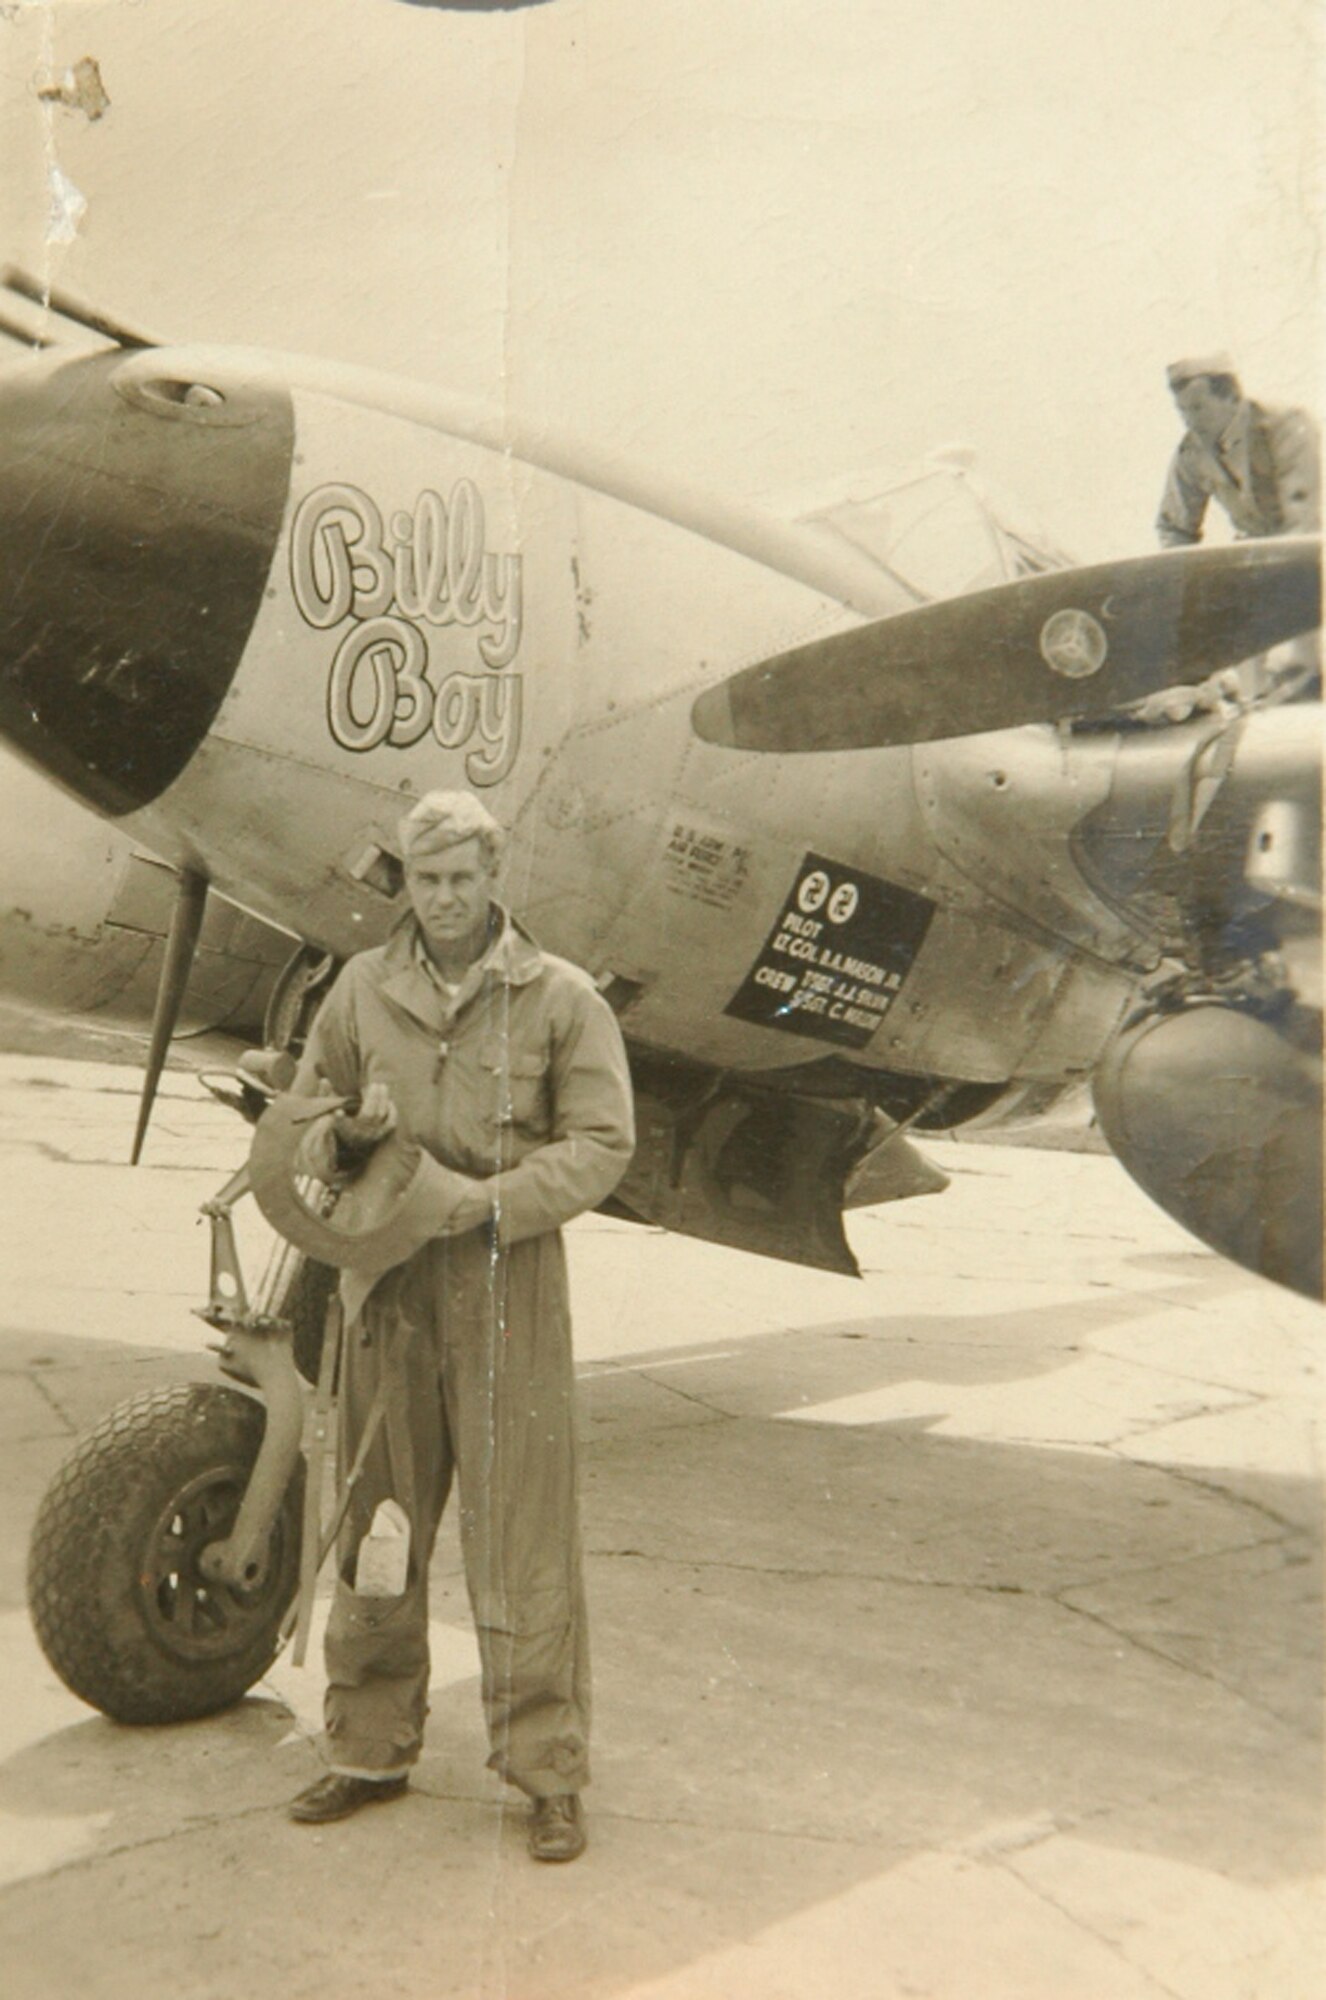 Pictured is Col. (Ret.) Ben Mason, who served as commander of the 82nd Fighter Group in 1944. Colonel (Ret.) Mason, a P-38 Lightning pilot, was assigned to the 82nd Fighter Group and flew numerous combat missions over Italy and North Africa during WWII. The 82nd Fighter Group was composed of the 95th, 96th and 97th Fighter Squadrons.  (Courtesy photo) 